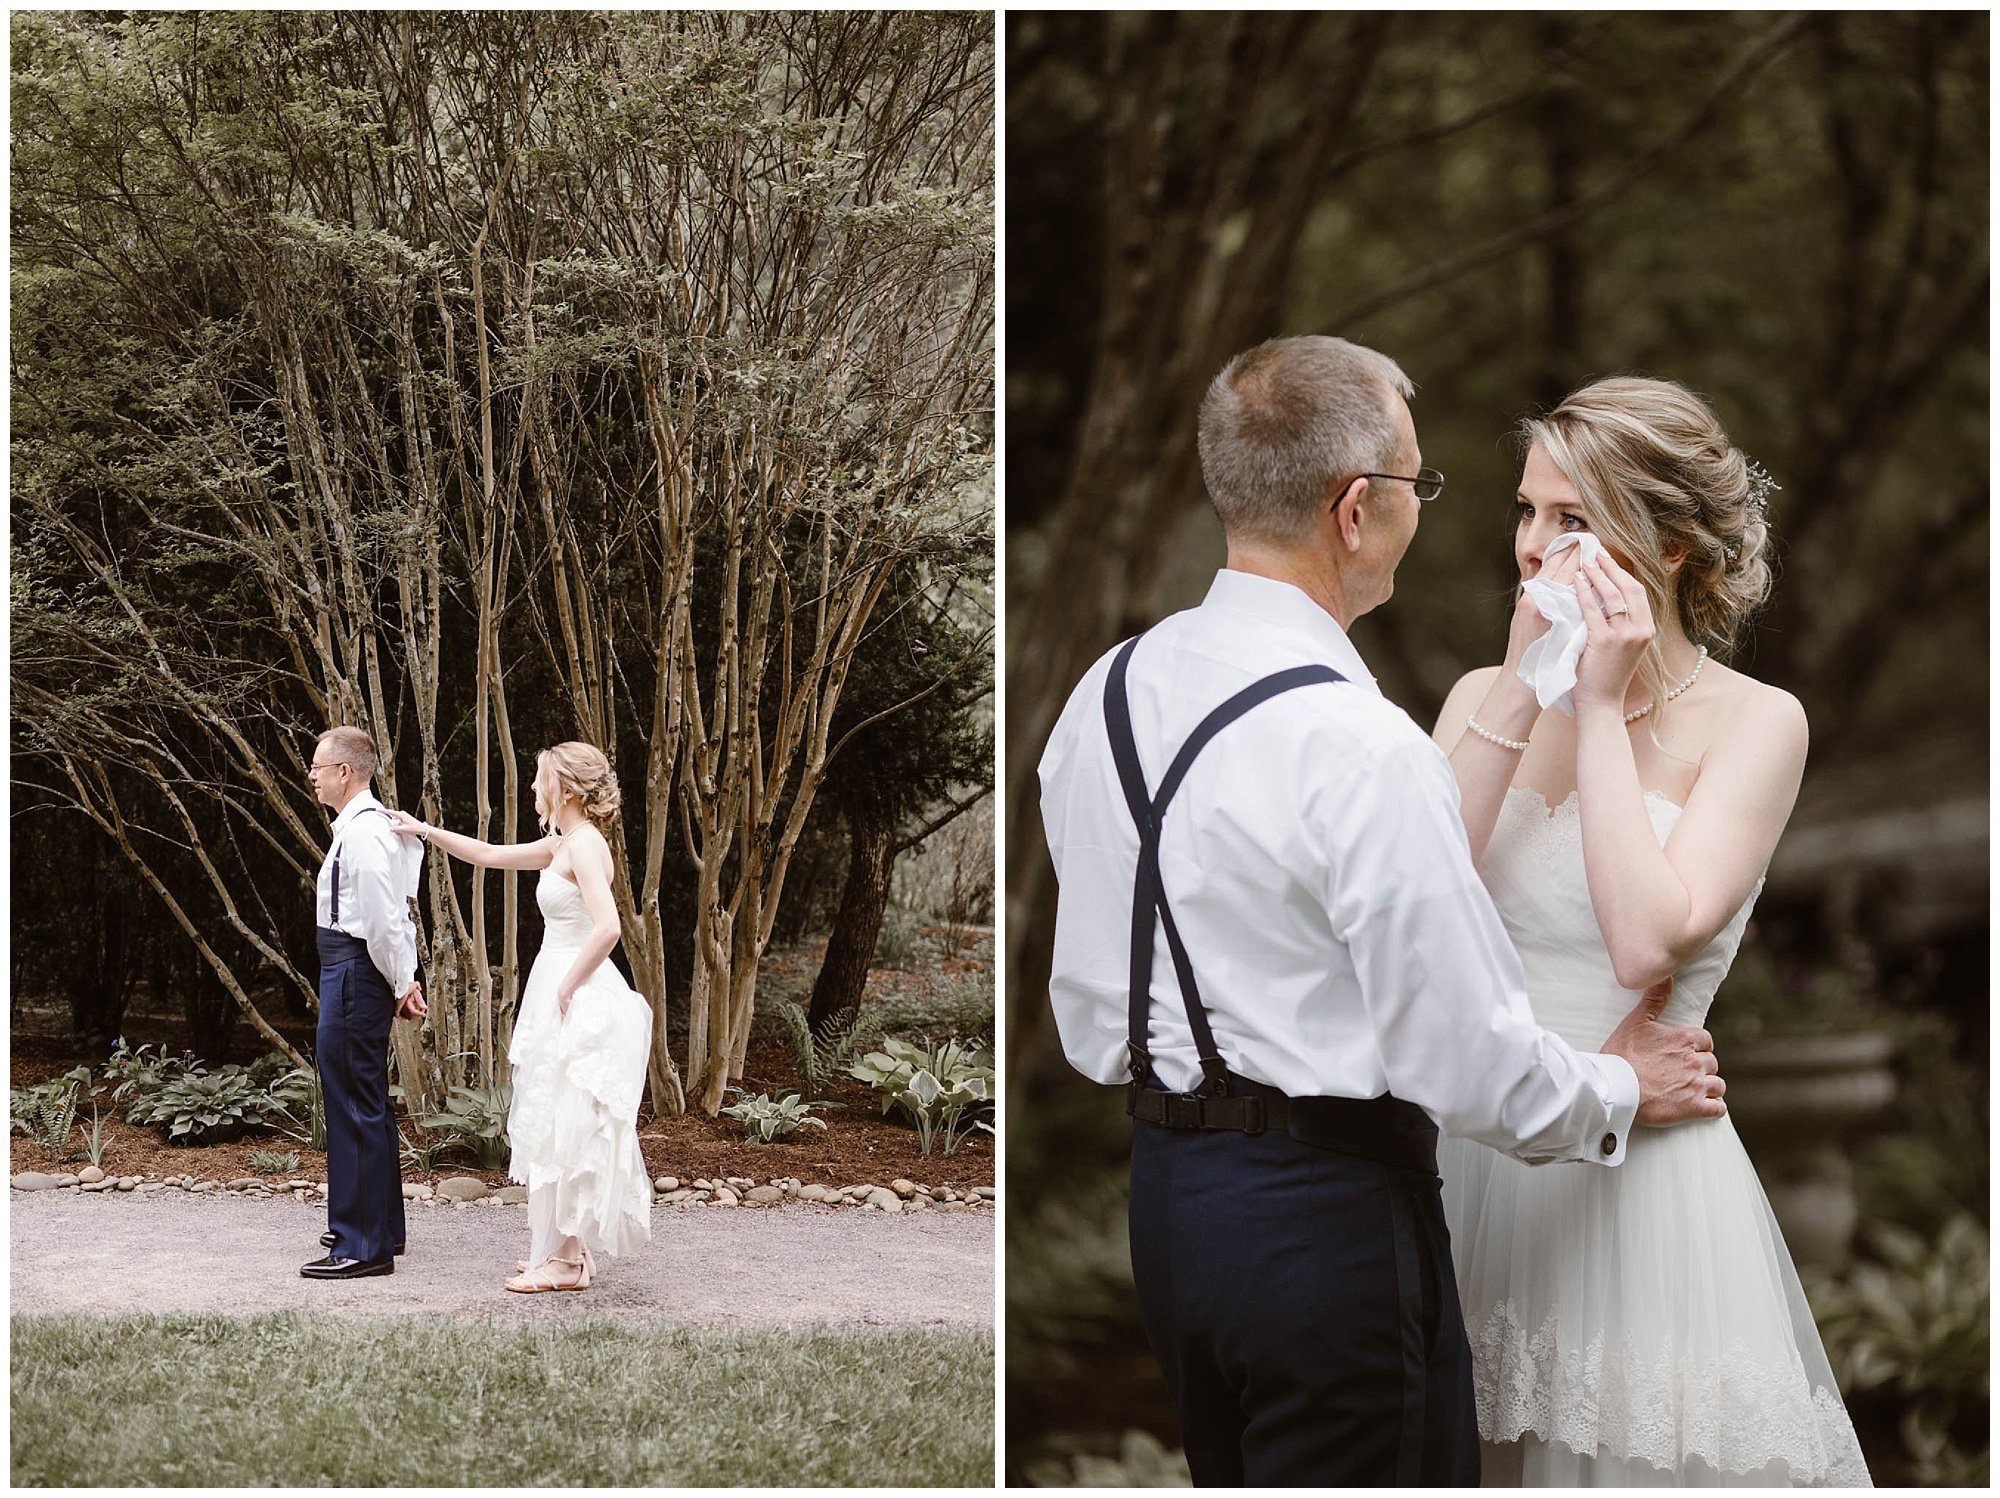 First look photos between bride and her father at The Lily Barn